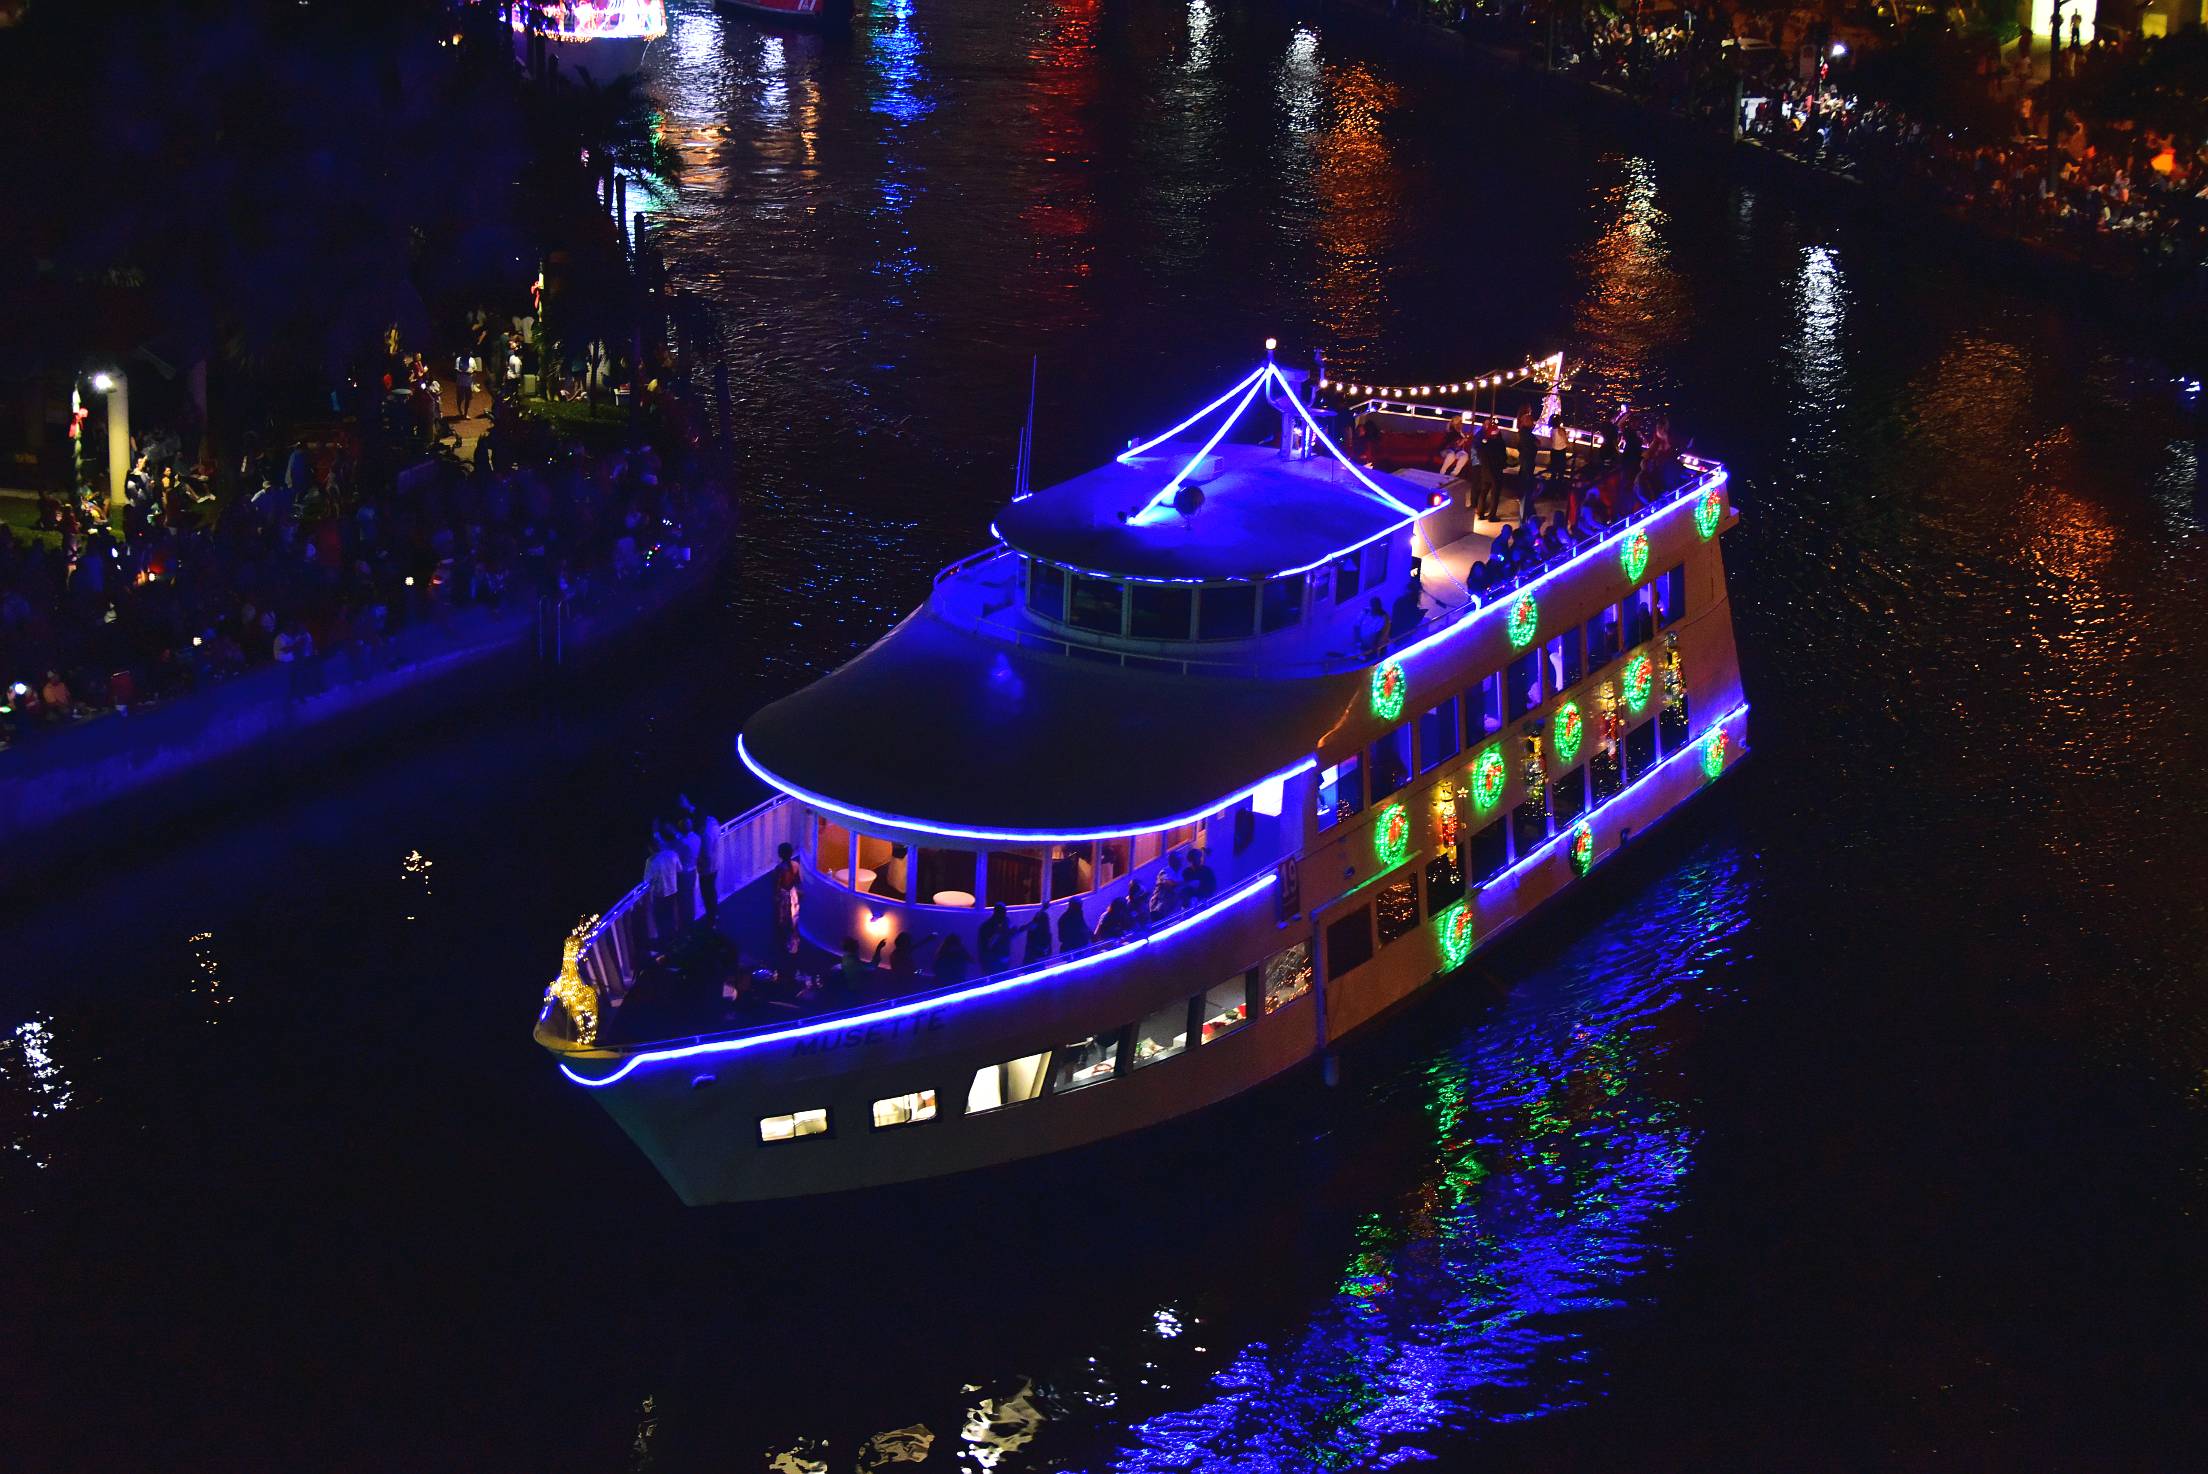 Ballyhoo 1, boat number 20 in the 2021 Winterfest Boat Parade